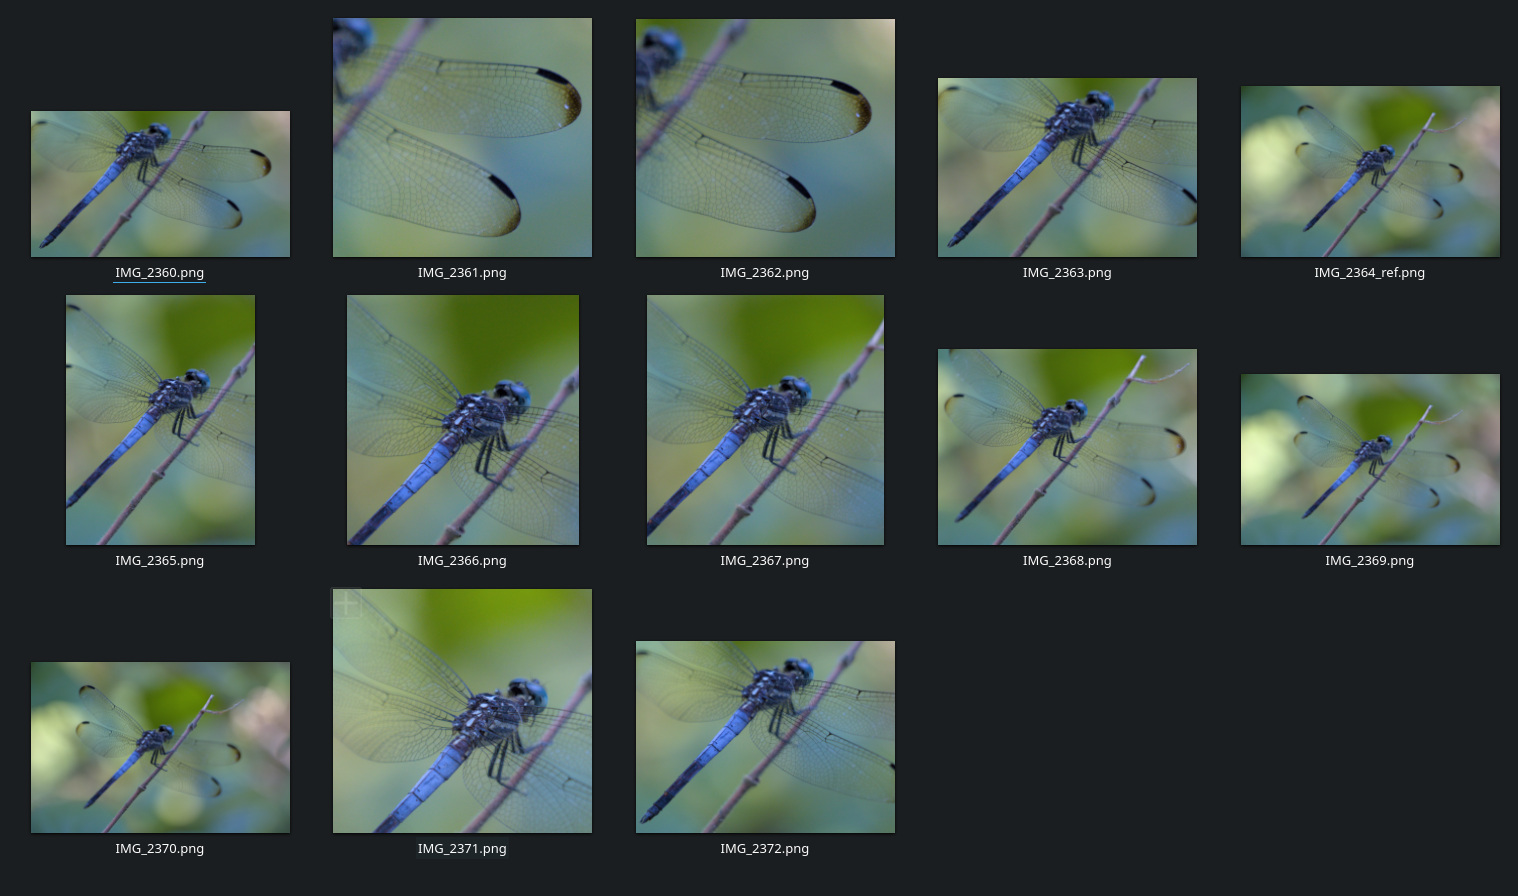 A screenshot with 13 similar images of a blue dragonfly. Most of the images are cropped.